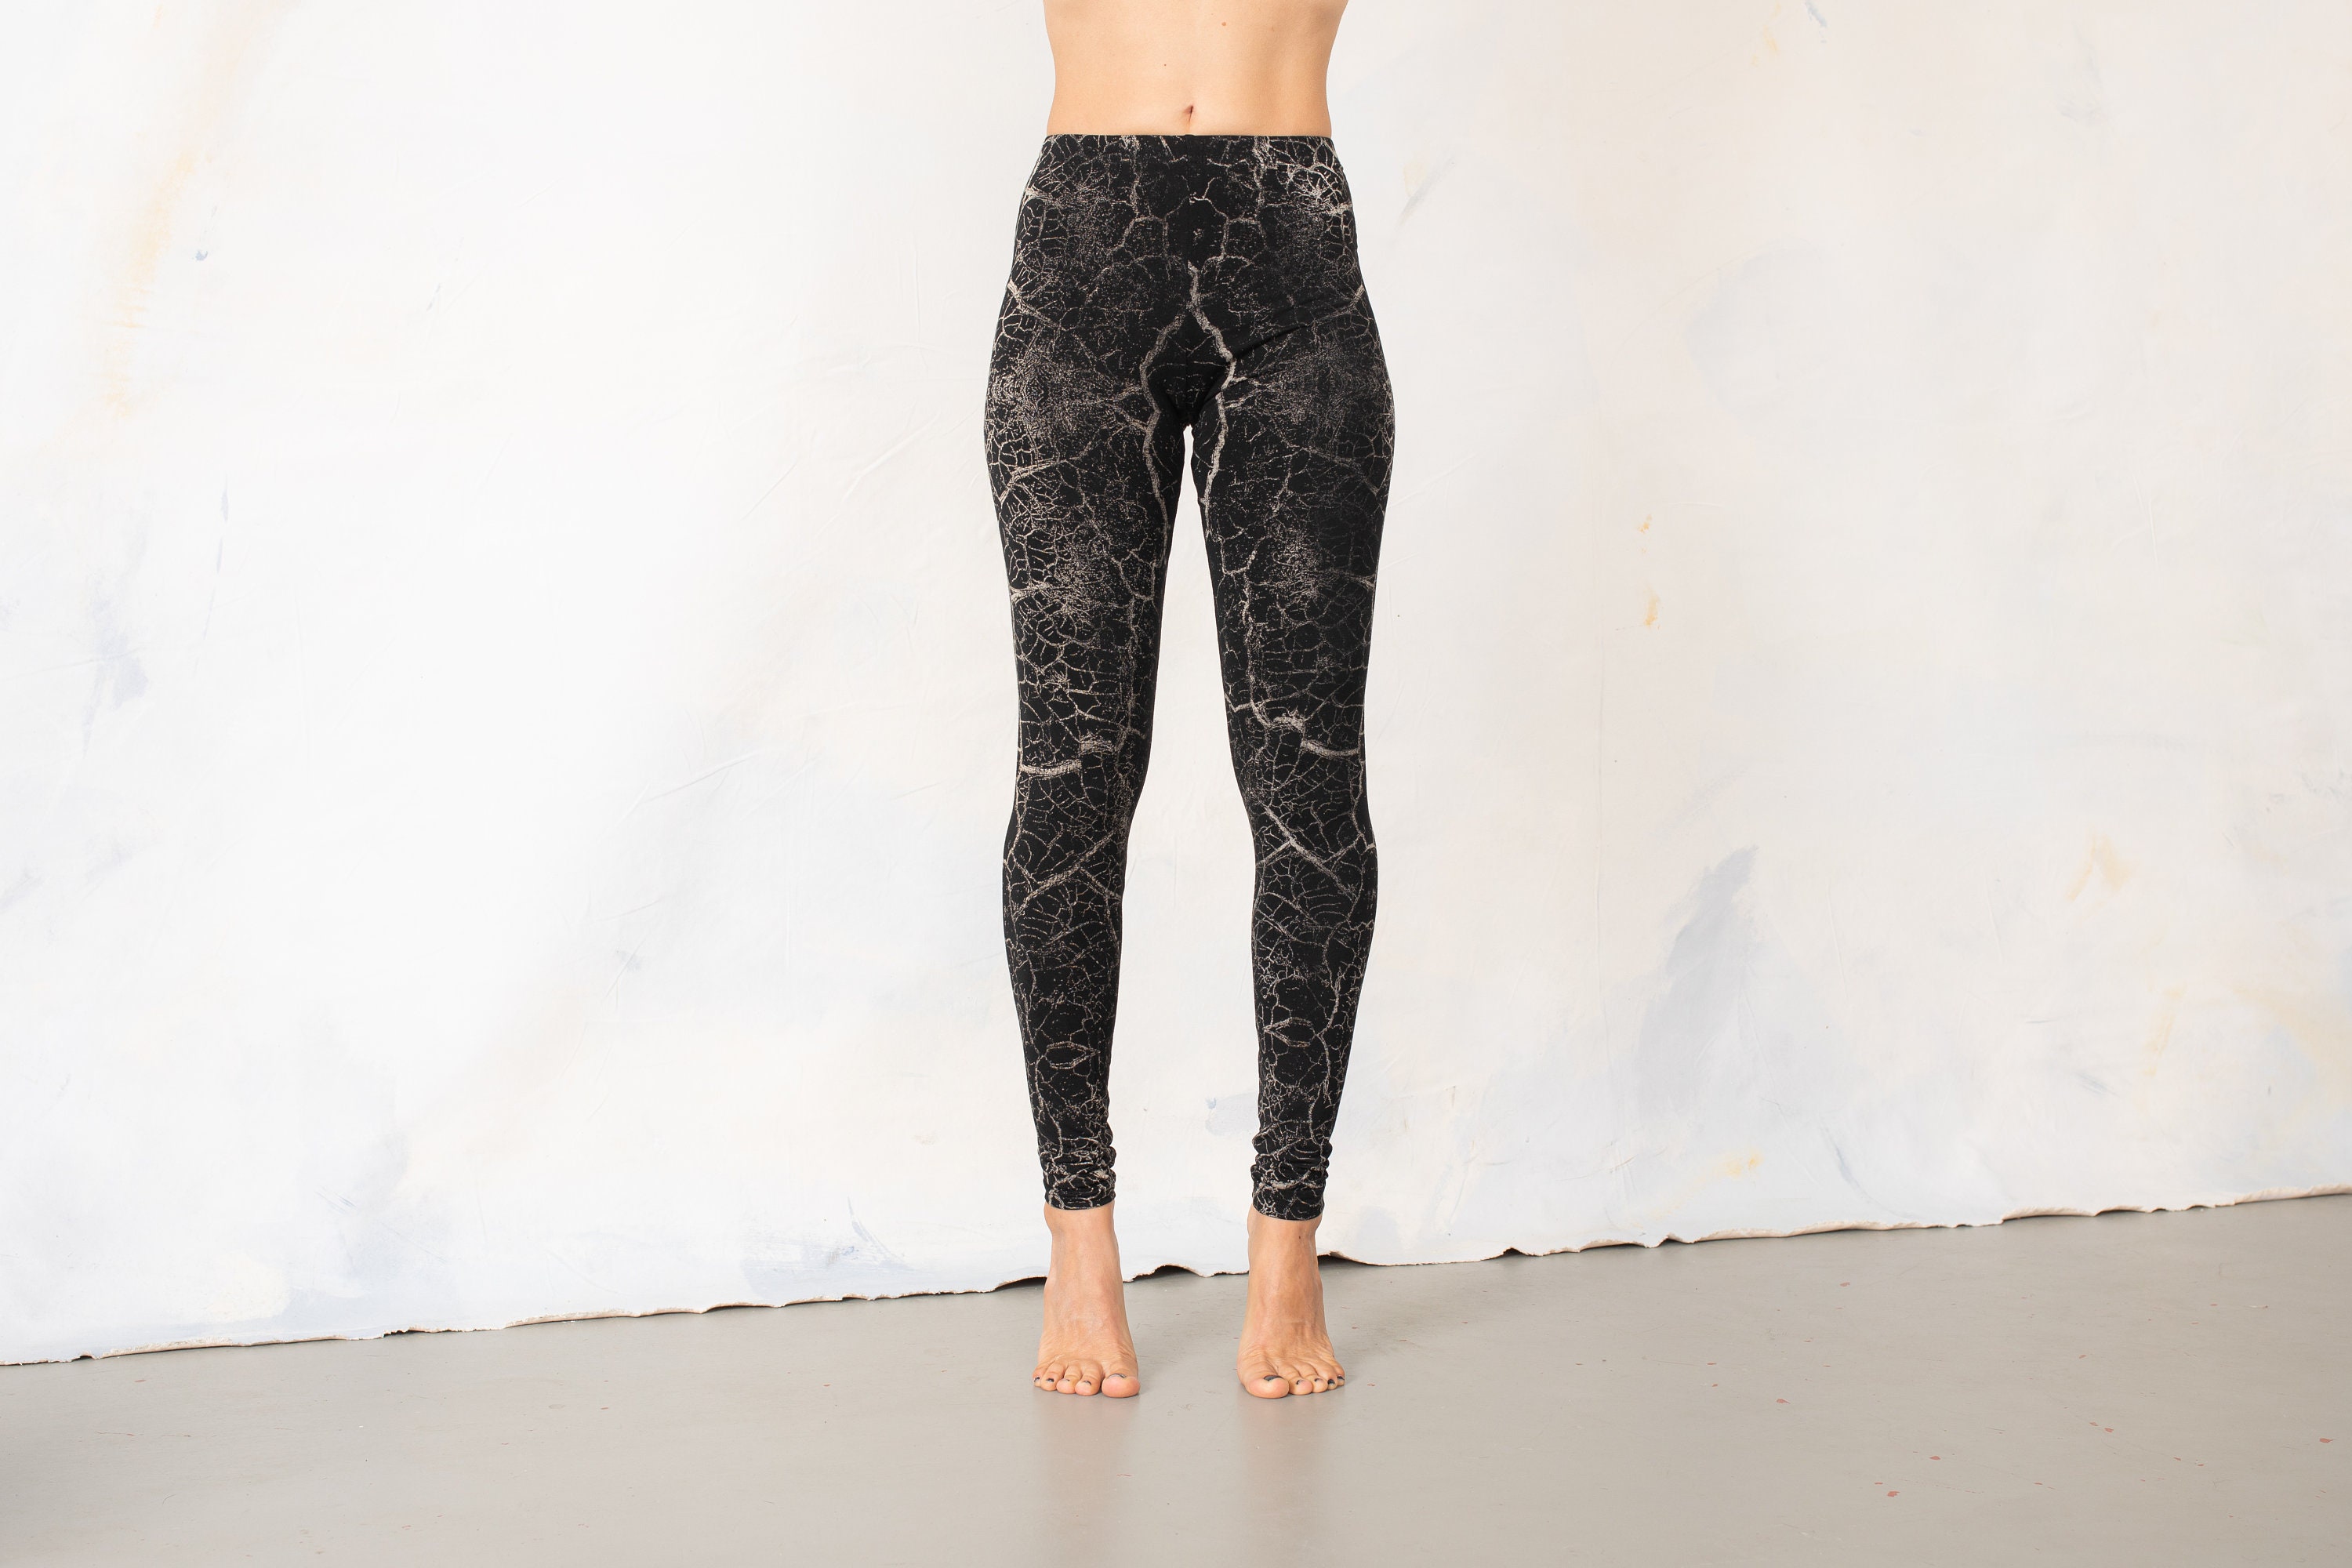 LEGGINGS with an abstract cracked Earth Pattern - unisex - black-gray-beige